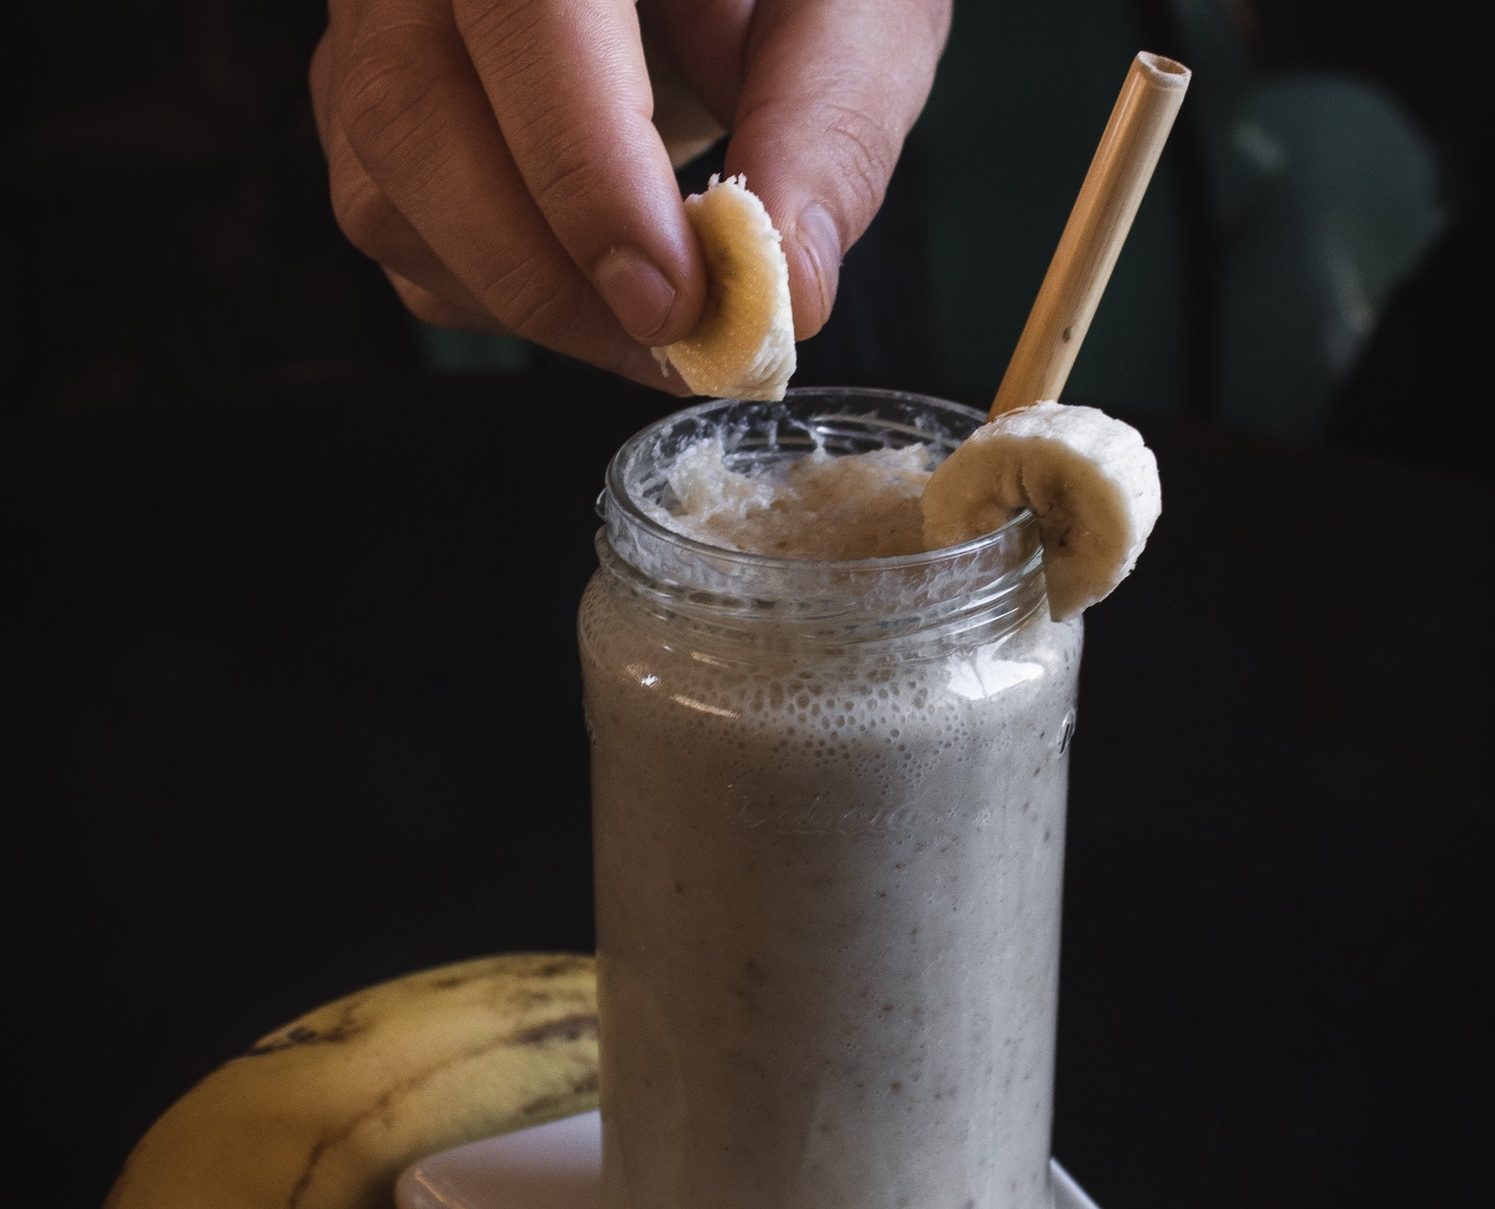 milkshake with a hand putting a banana topping on the side